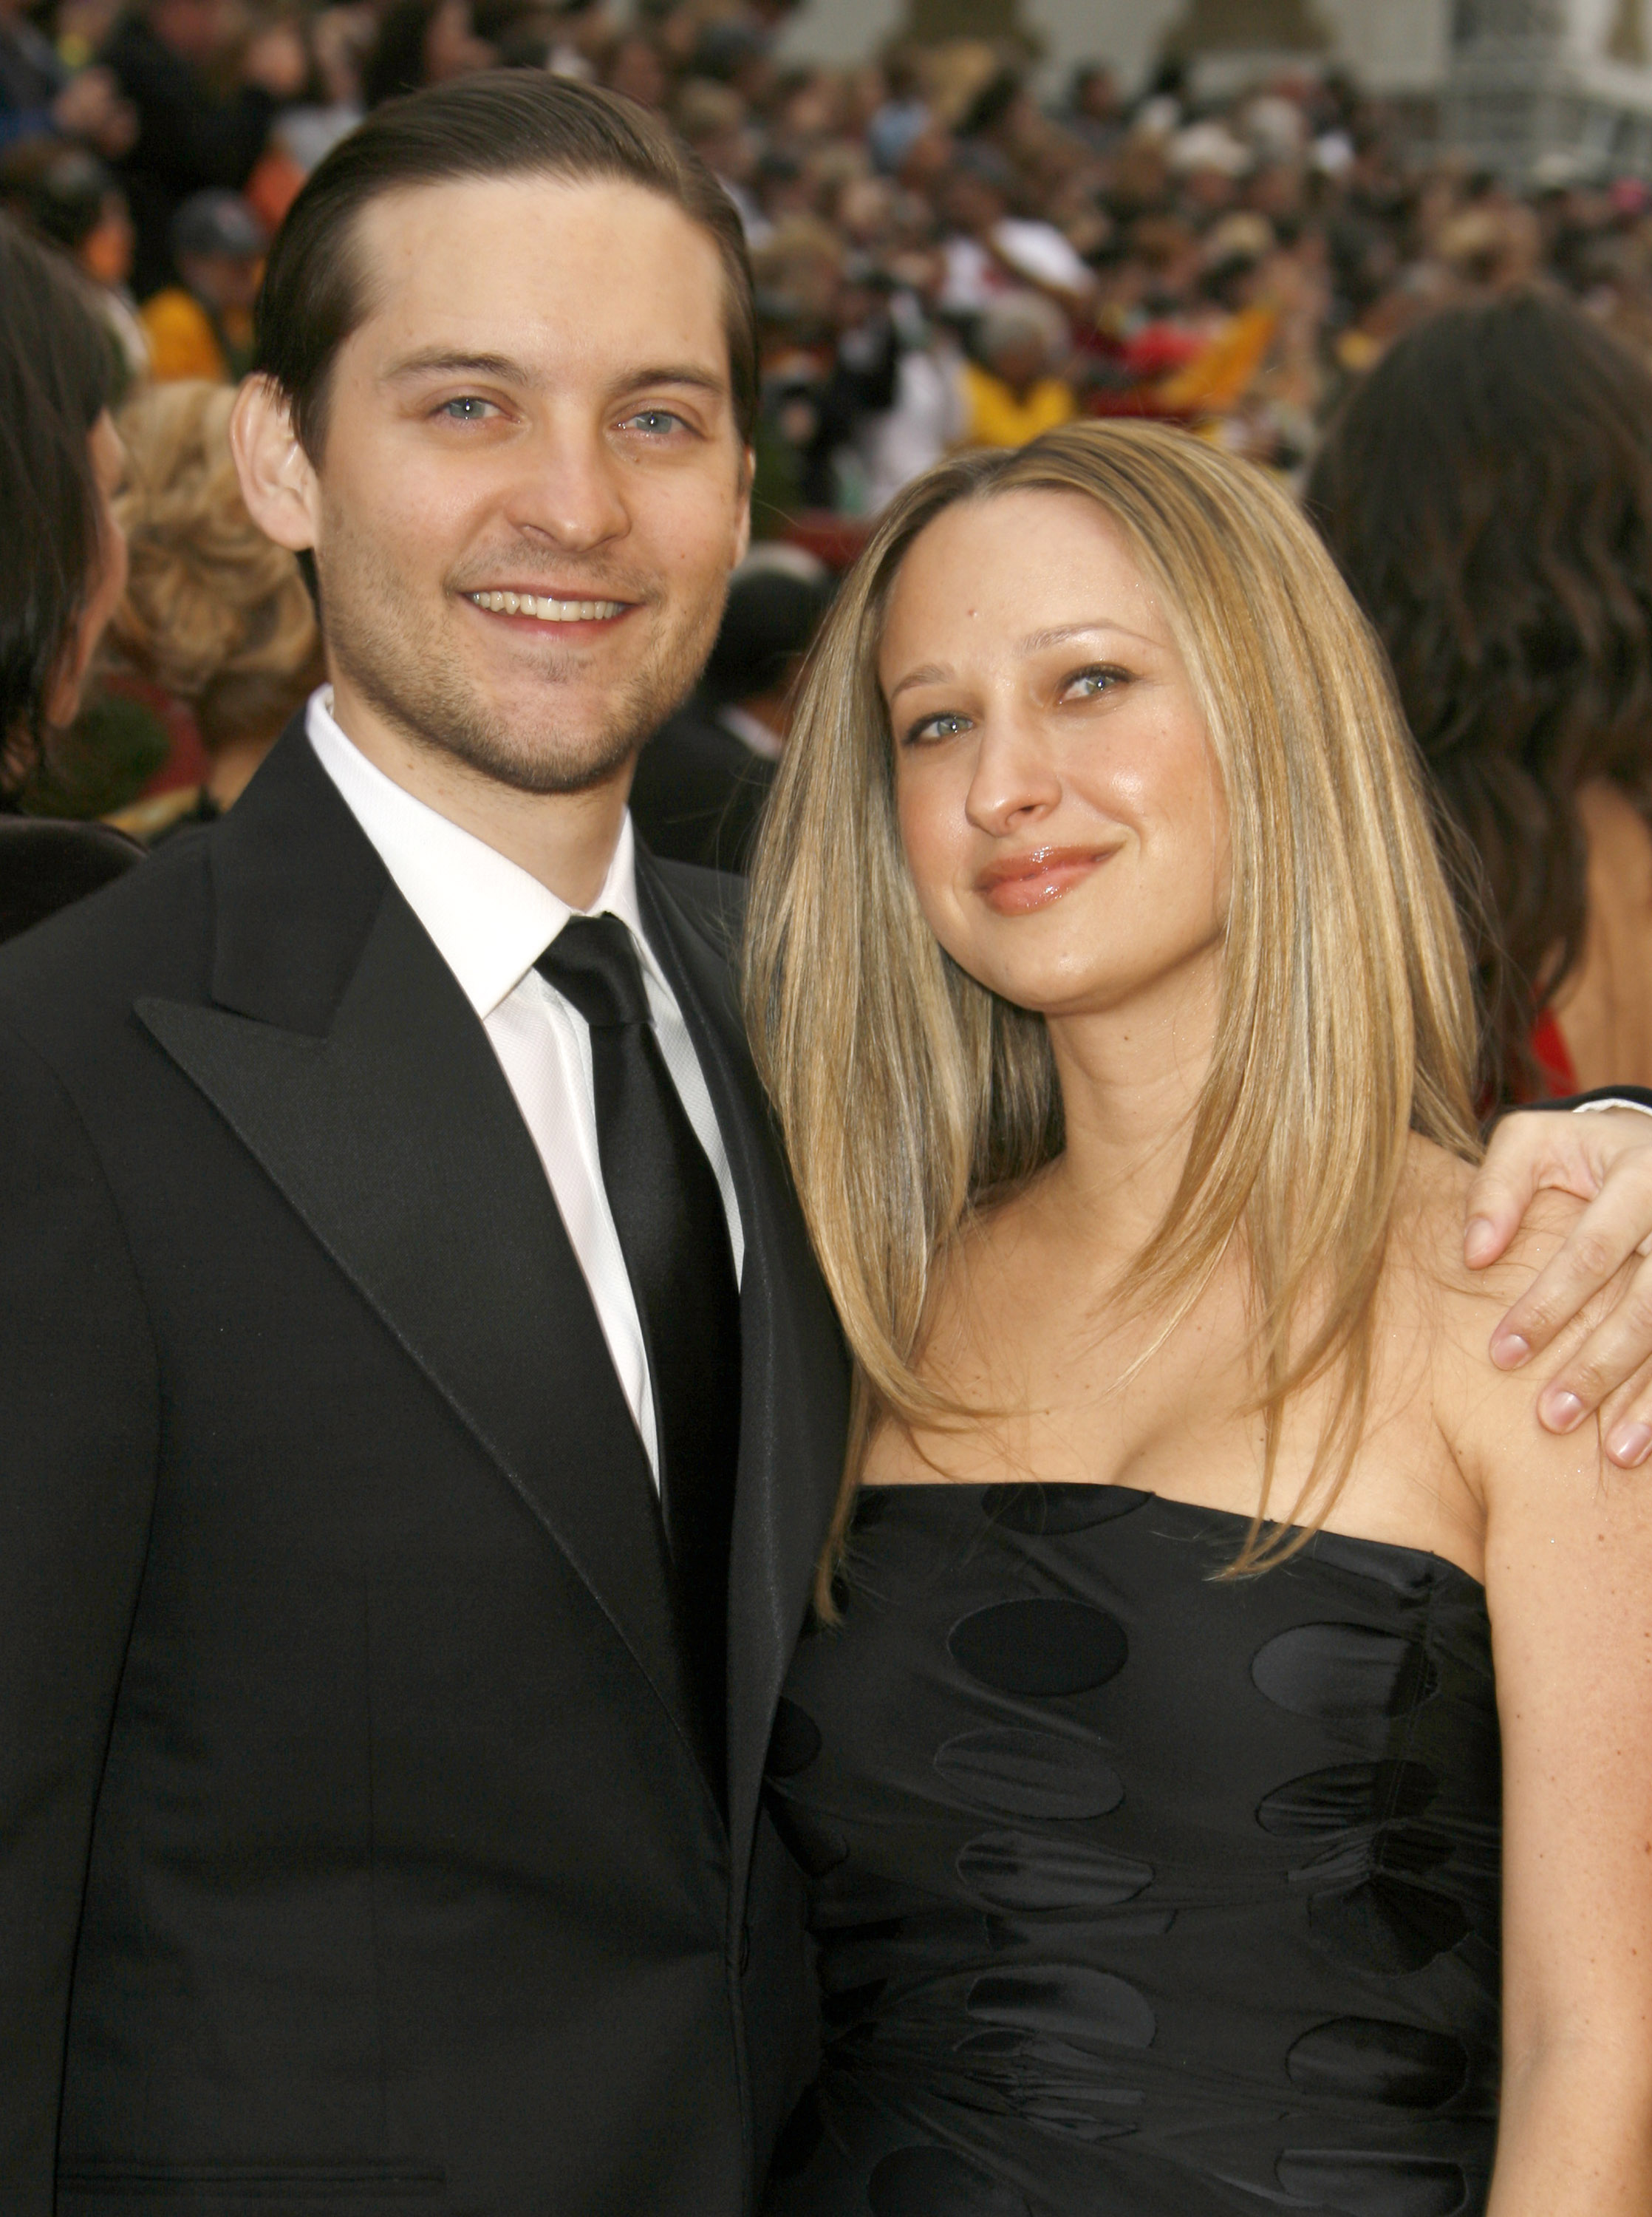 Tobey Maguire and Jennifer Meyer at the 79th Annual Academy Awards on February 25, 2007, in Los Angeles, California. | Source: Getty Images